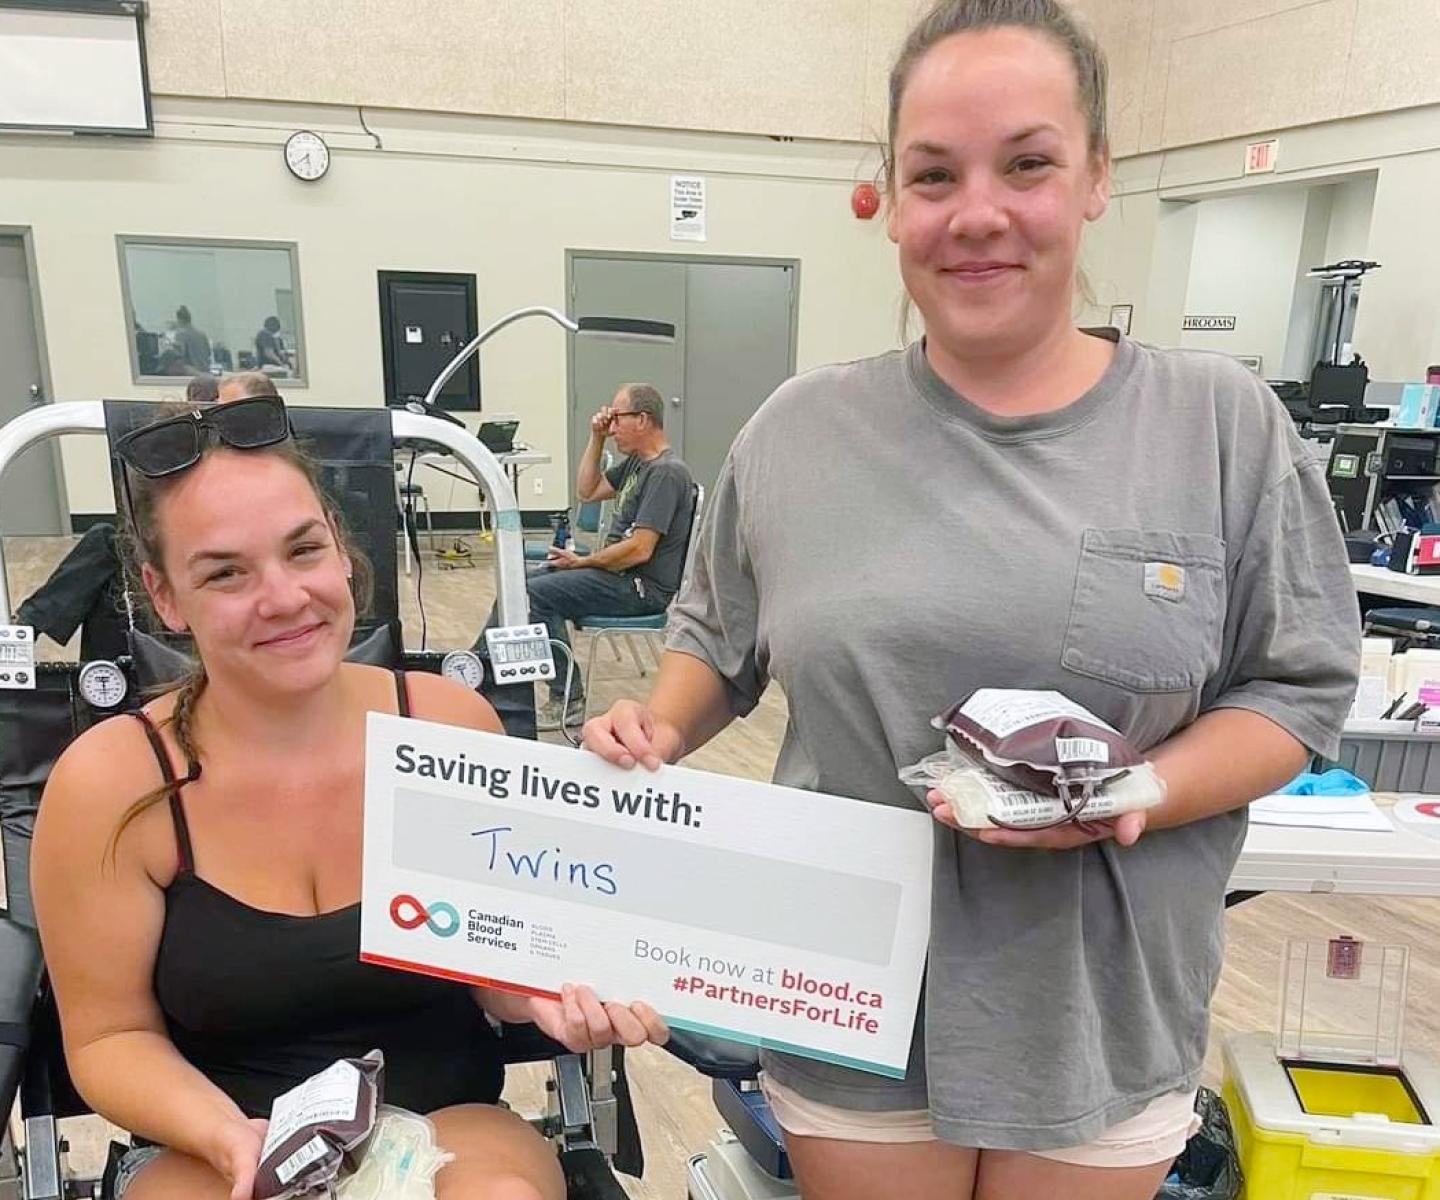 Twin blood donors holding blood donations and Canadian Blood Services sign that says Saving lives with: Twins.